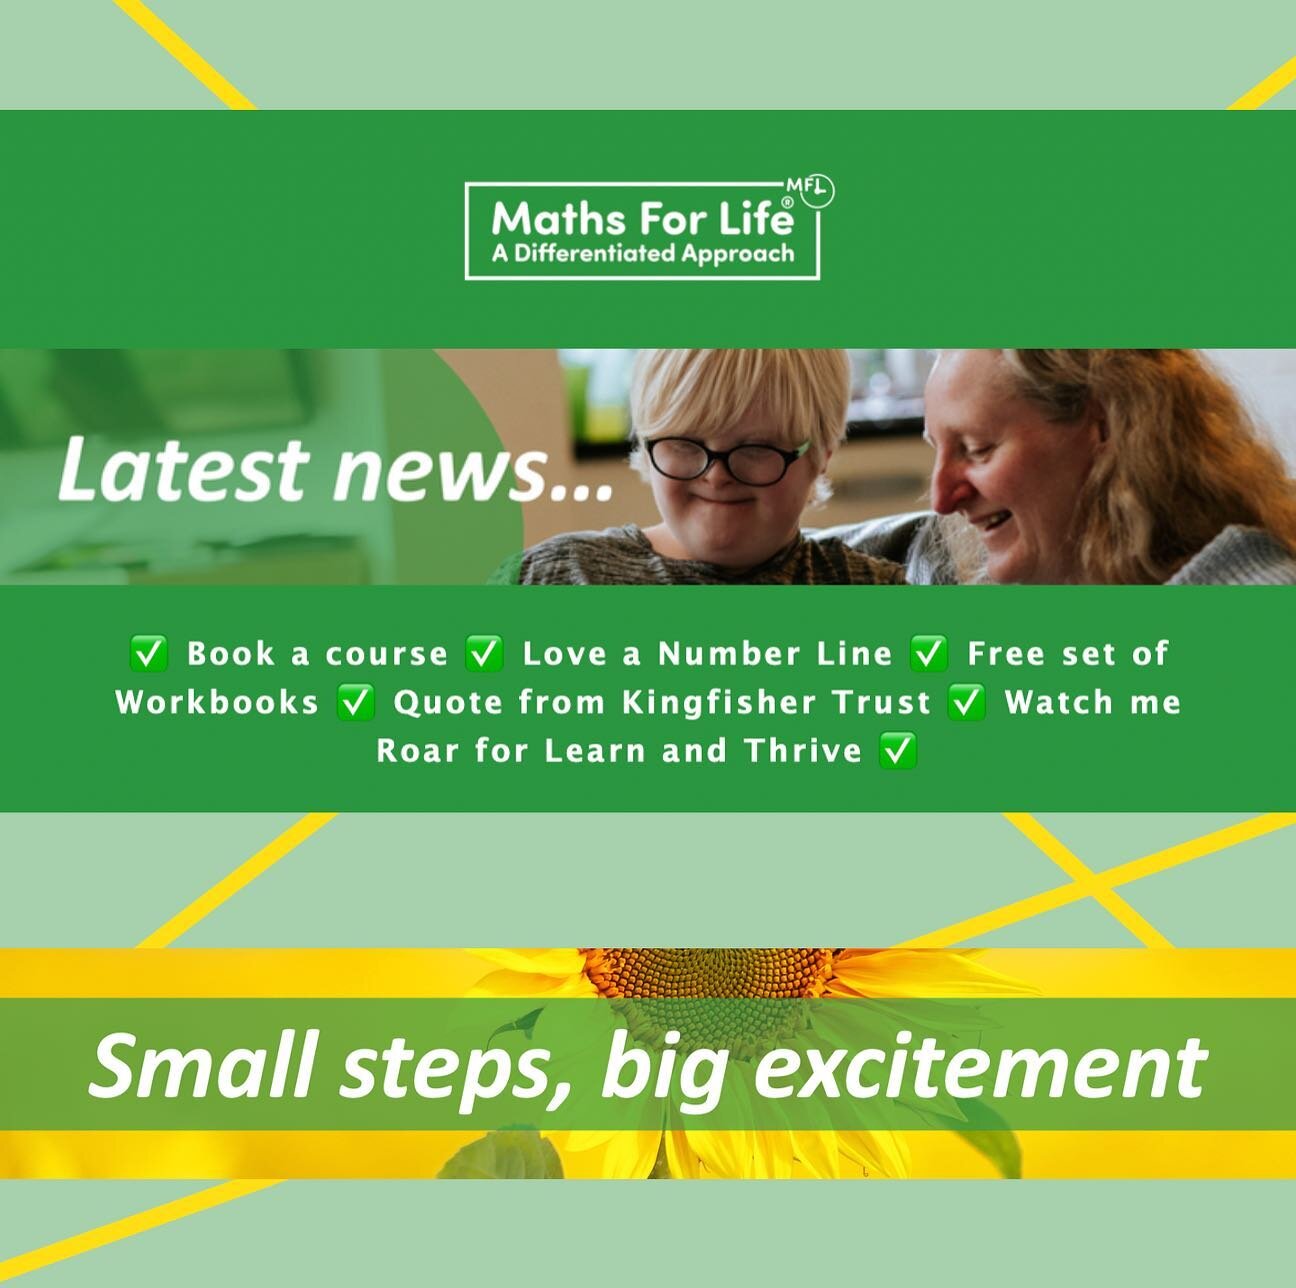 Read the latest news from the Maths For Life programme by following the link in the profile&hellip;

➕➖➗✖️🦹&zwj;♀️🤓❤️MATHS
Be different, #lovemaths #mathsforlife

#StrictlyMakaton #LearnandThrive
#specialeducationalneeds #learningdifficulties #diff